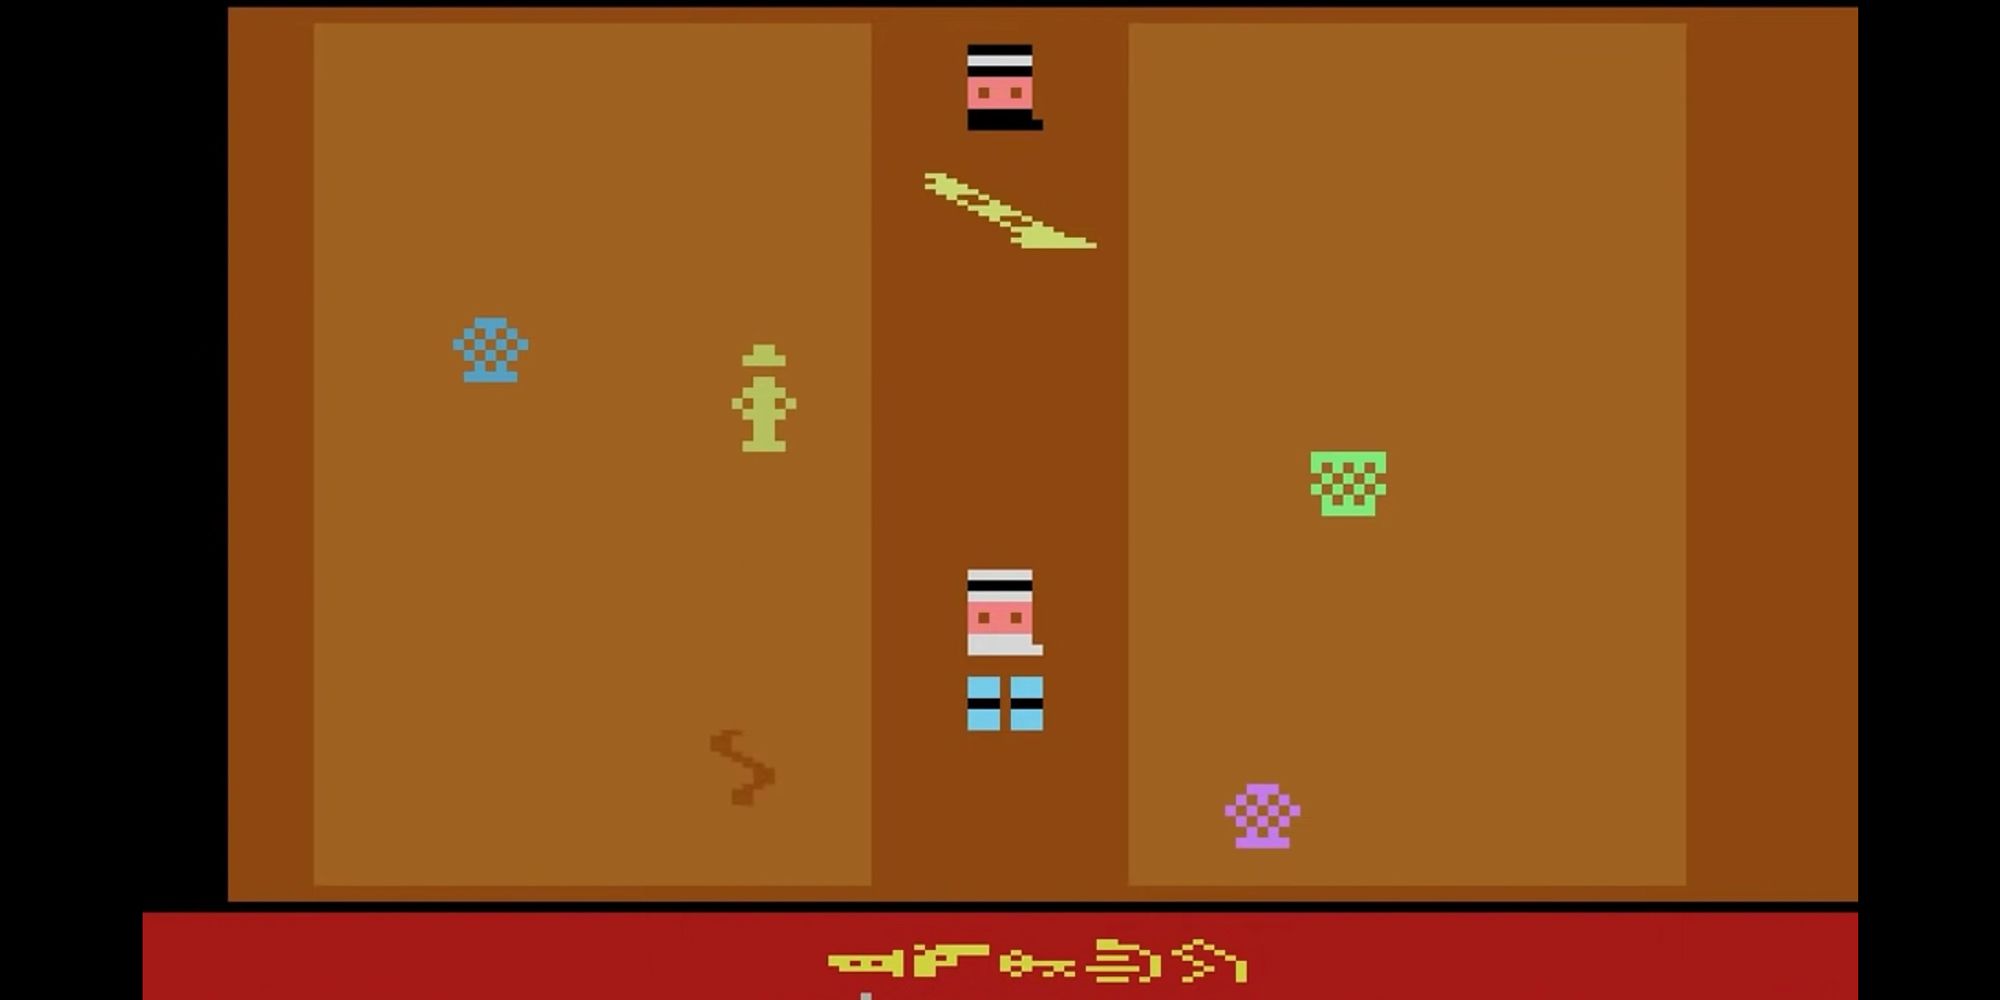 Raiders of the Lost Ark for the Atari 2600